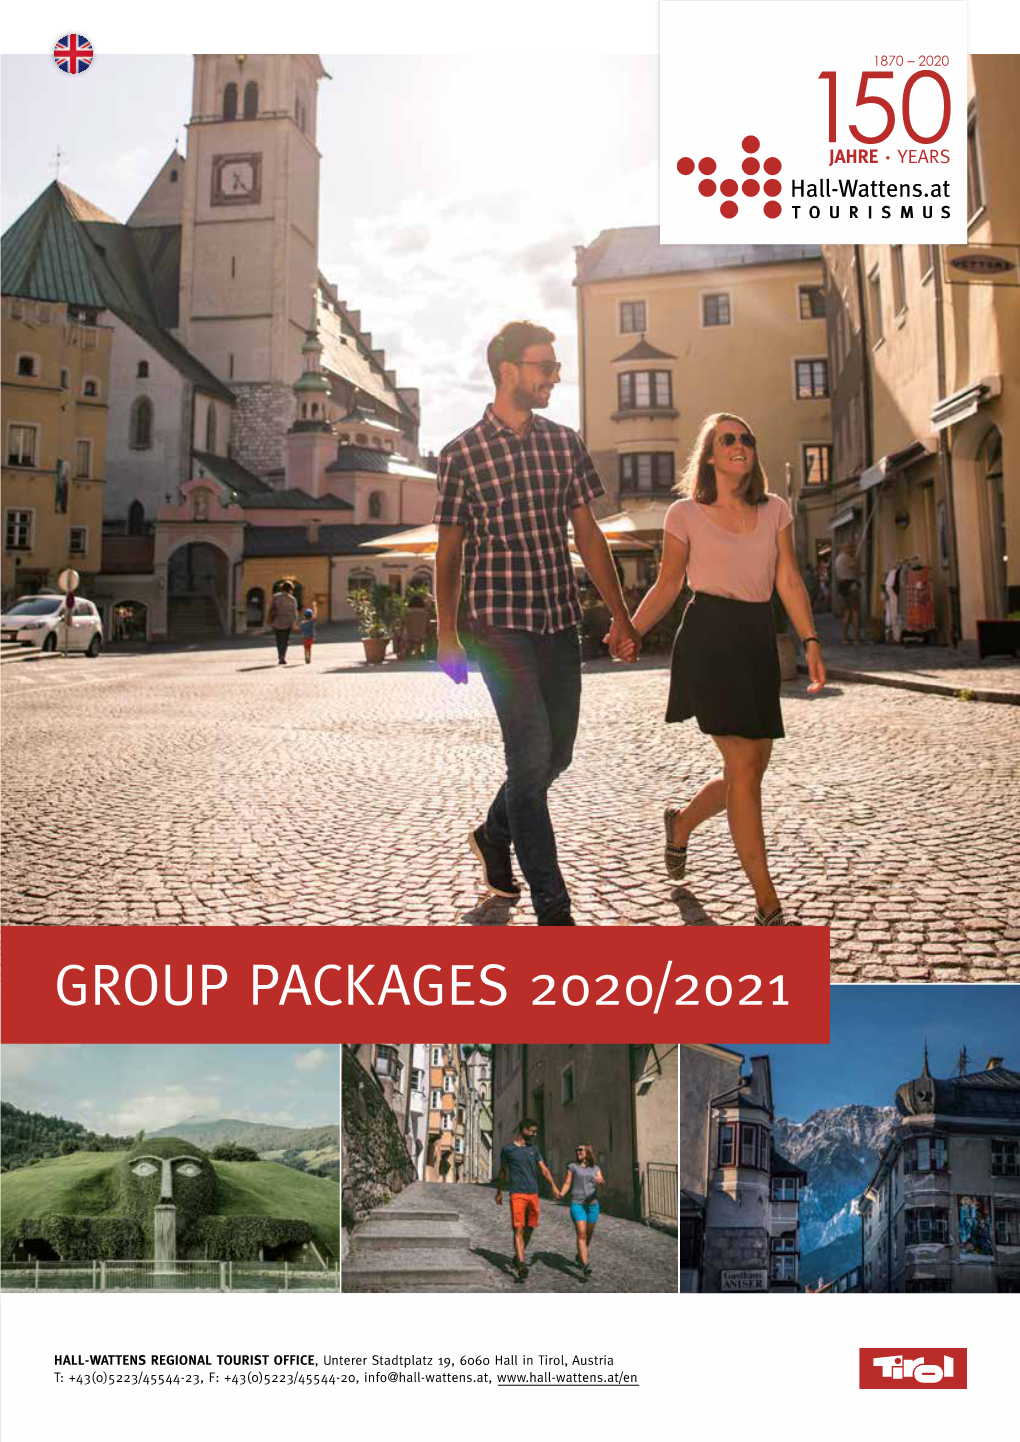 Group Packages 2020/2021